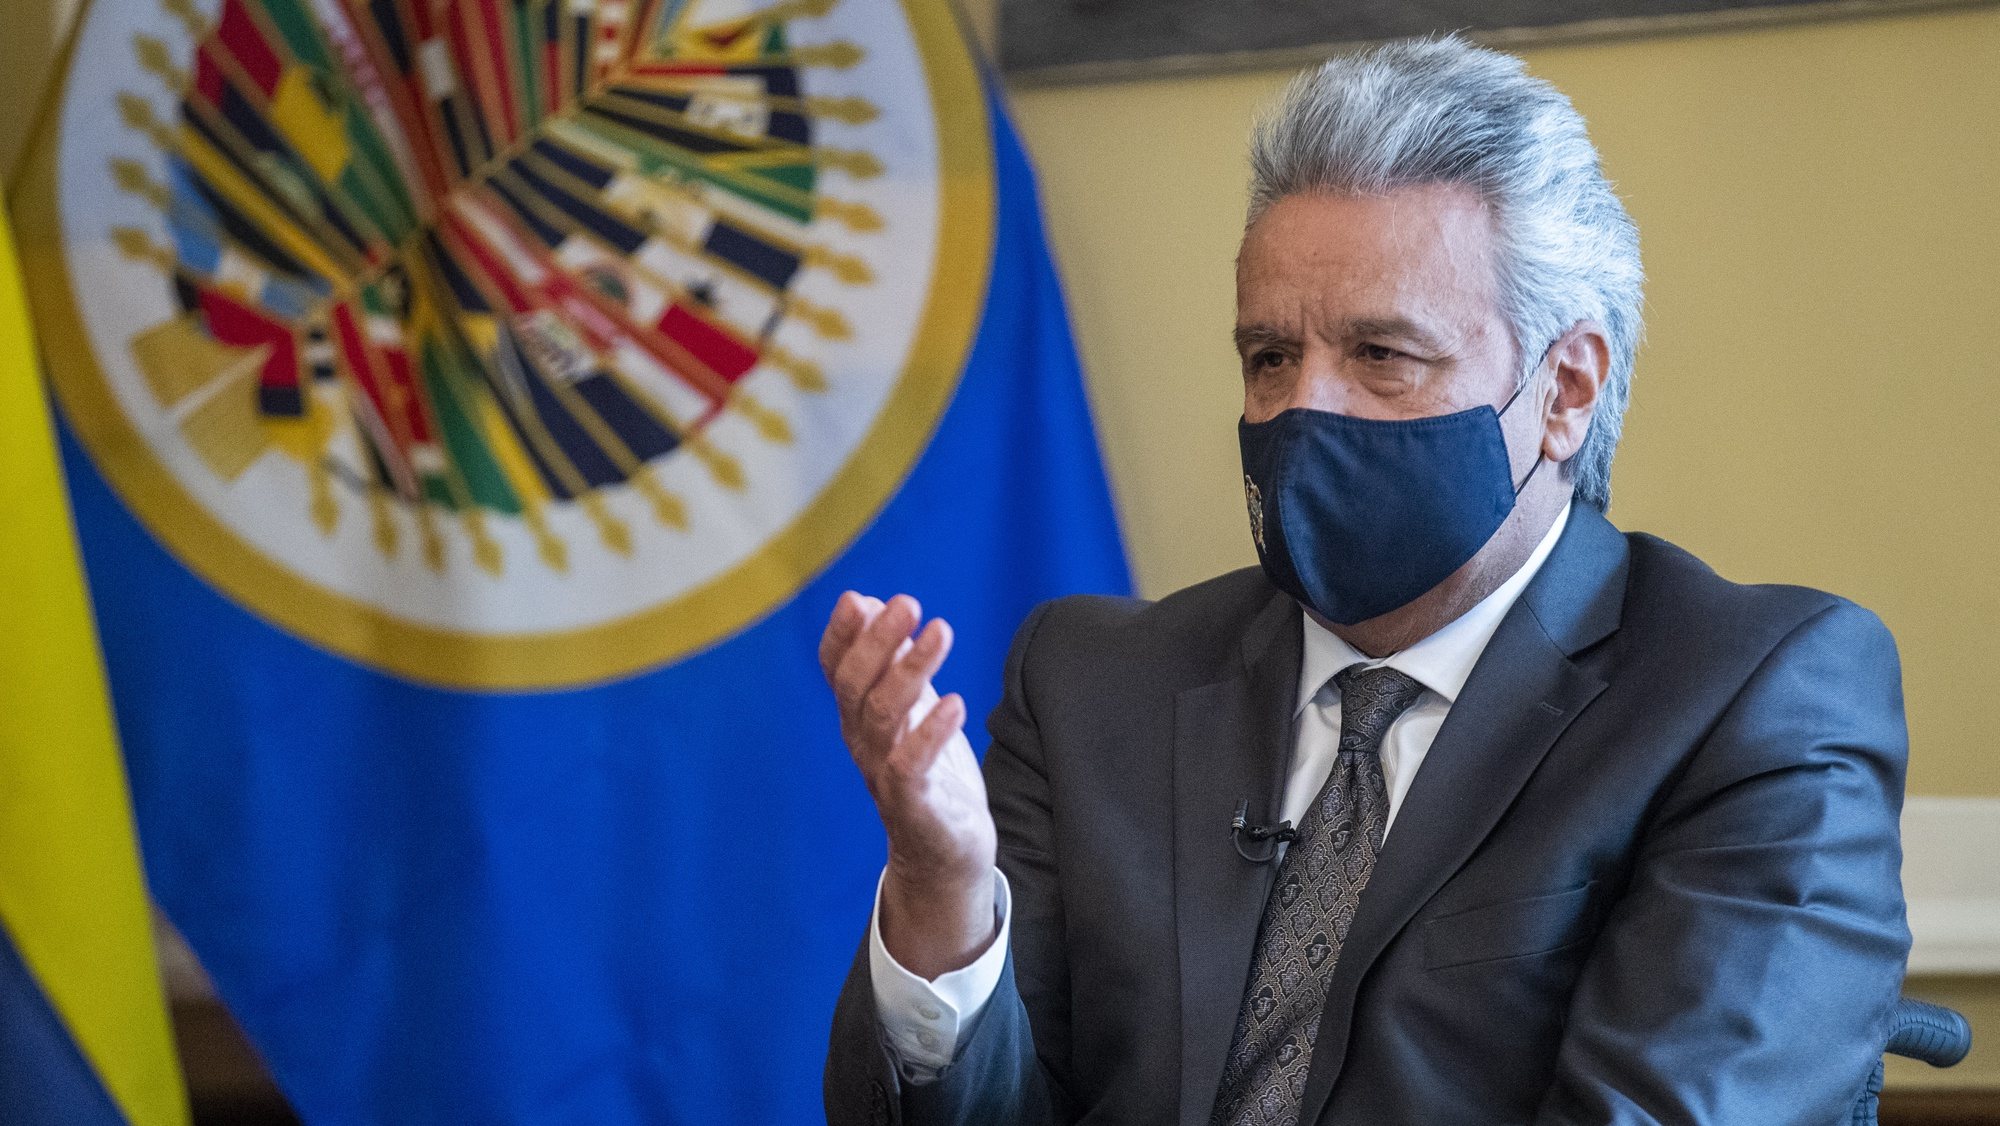 epa08969612 Ecuadorian President Lenin Moreno during a meeting with OAS Secretary General Luis Almagro at the Embassy of Ecuador in Washington, DC, USA, 27 January 2021. President Moreno, reaffirmed in Washington the alliance with multilateral organizations such as the International Monetary Fund (IMF), the World Bank (WB) and the Inter-American Development Bank (IDB) as a decision of the State before leaving power next May.  EPA/SHAWN THEW